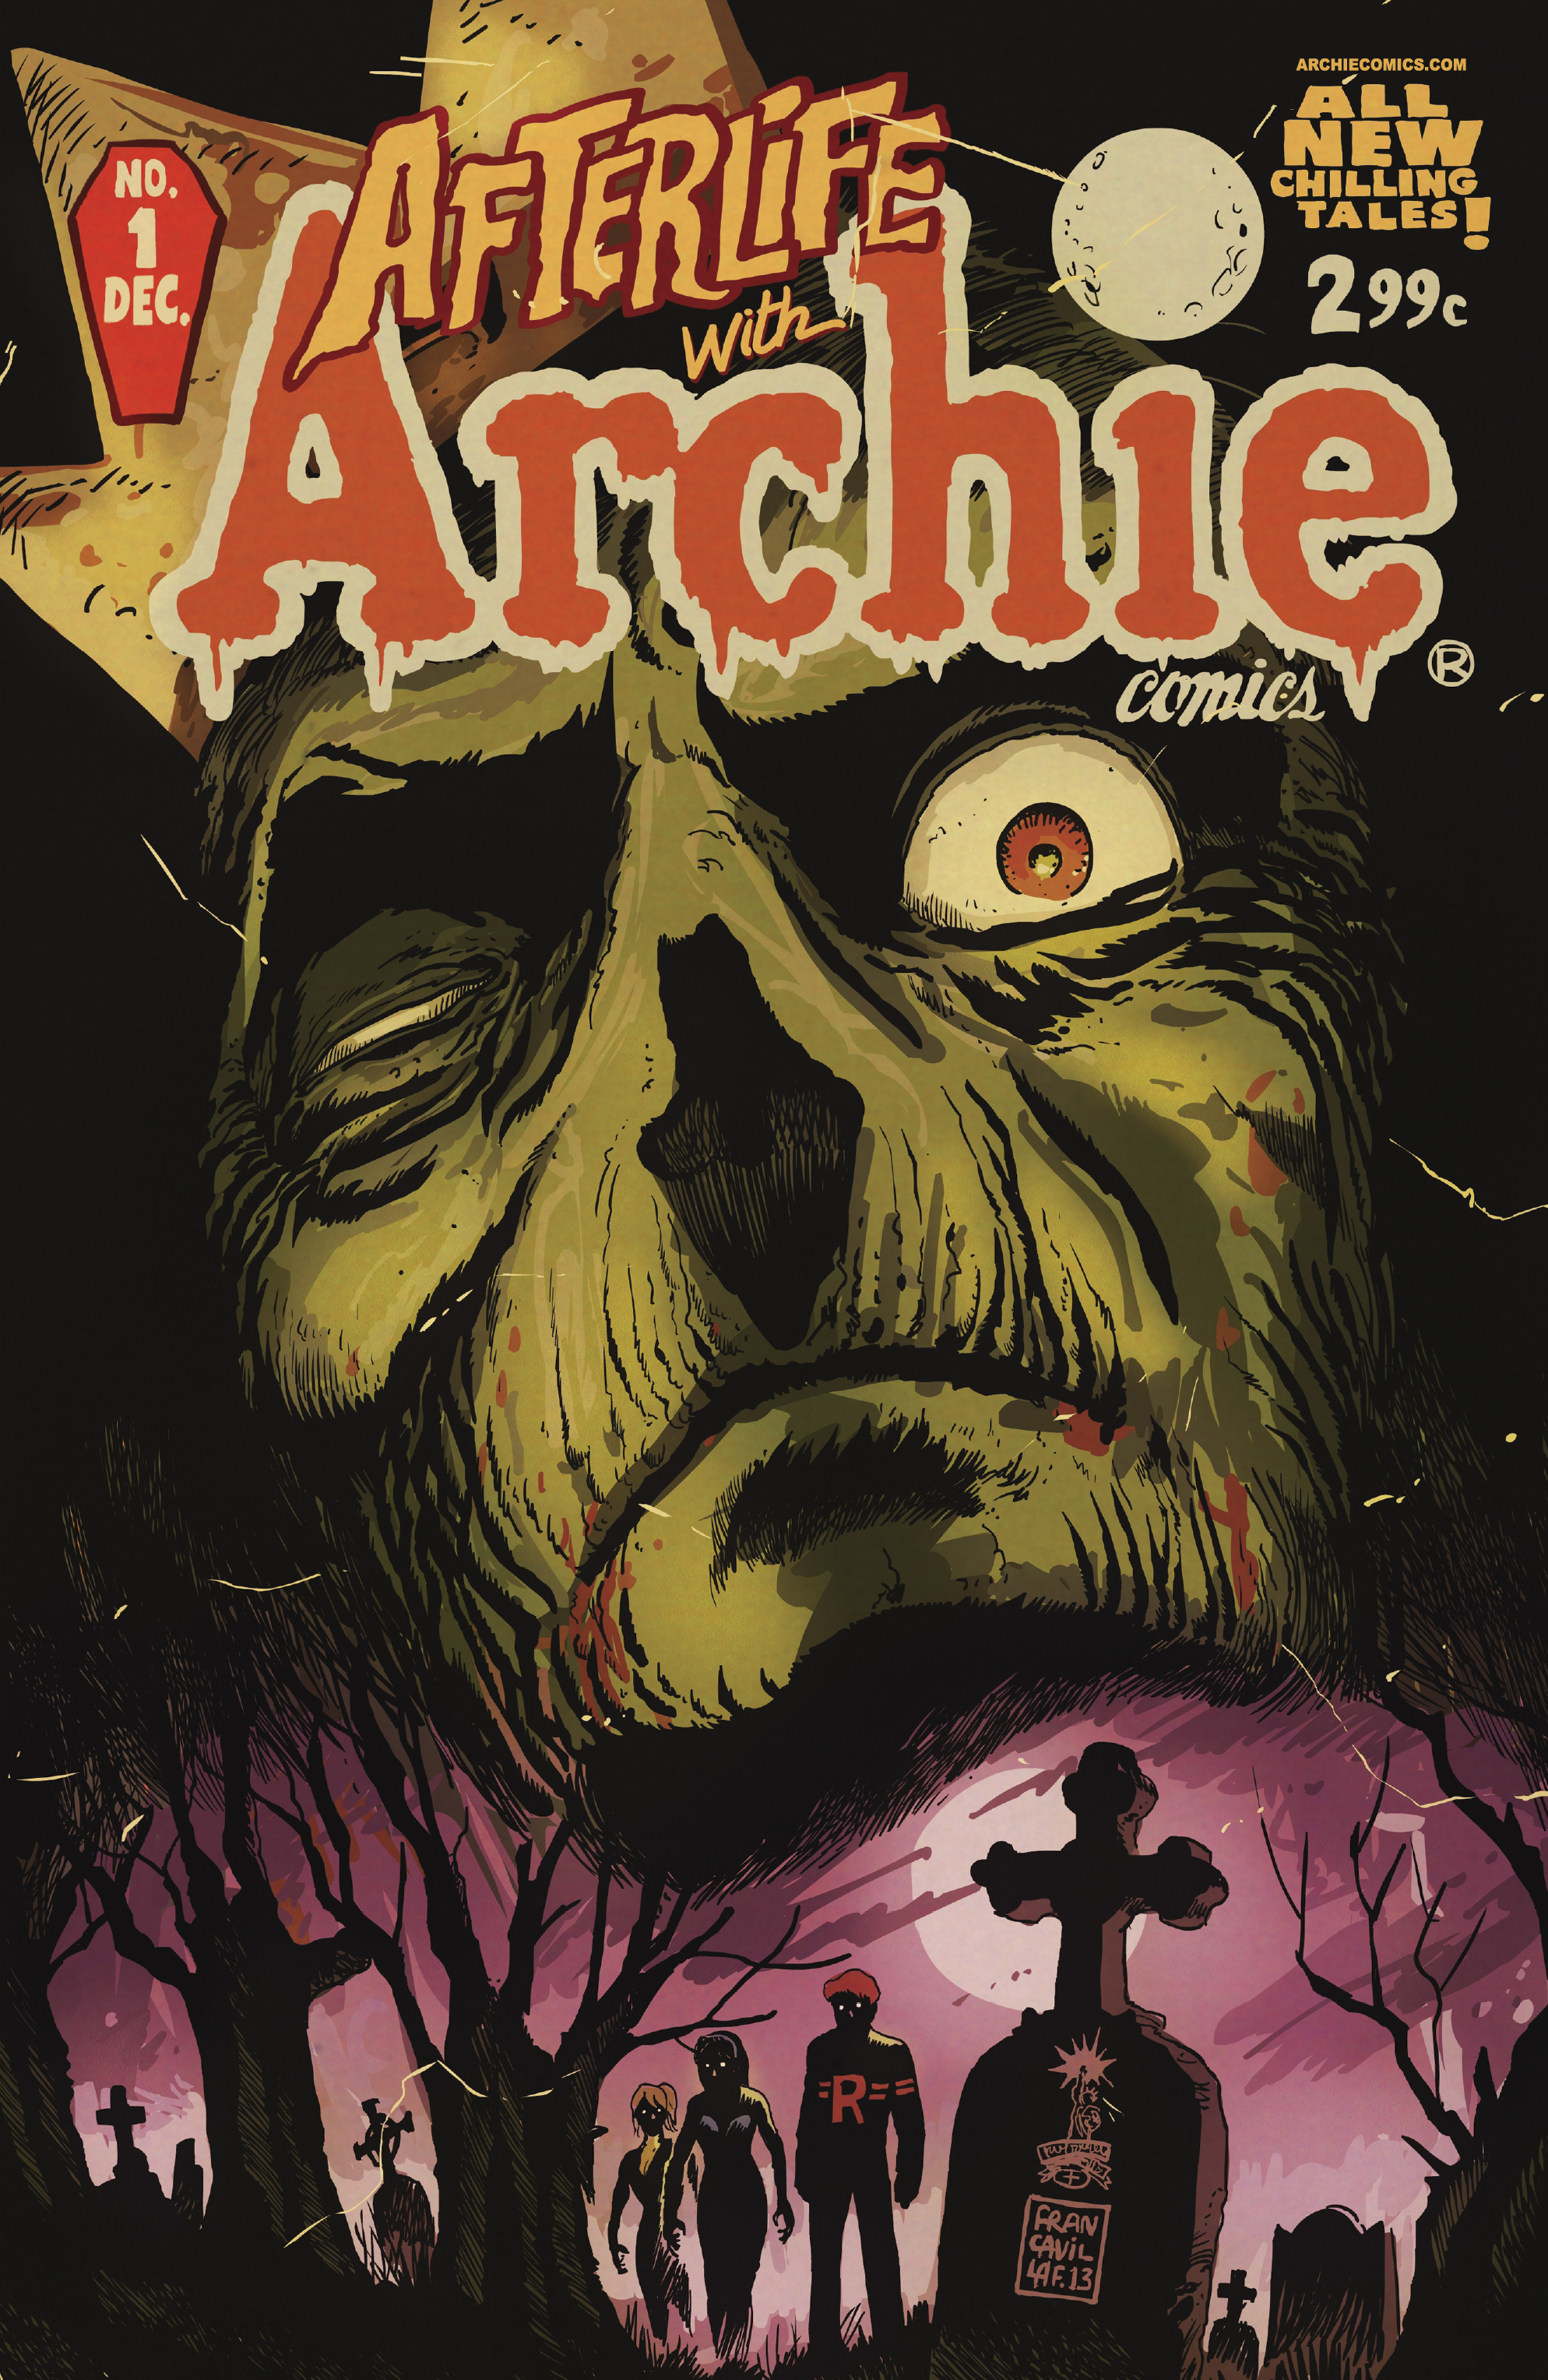 Afterlife with Archie Vol. 1 Escape from Riverdale